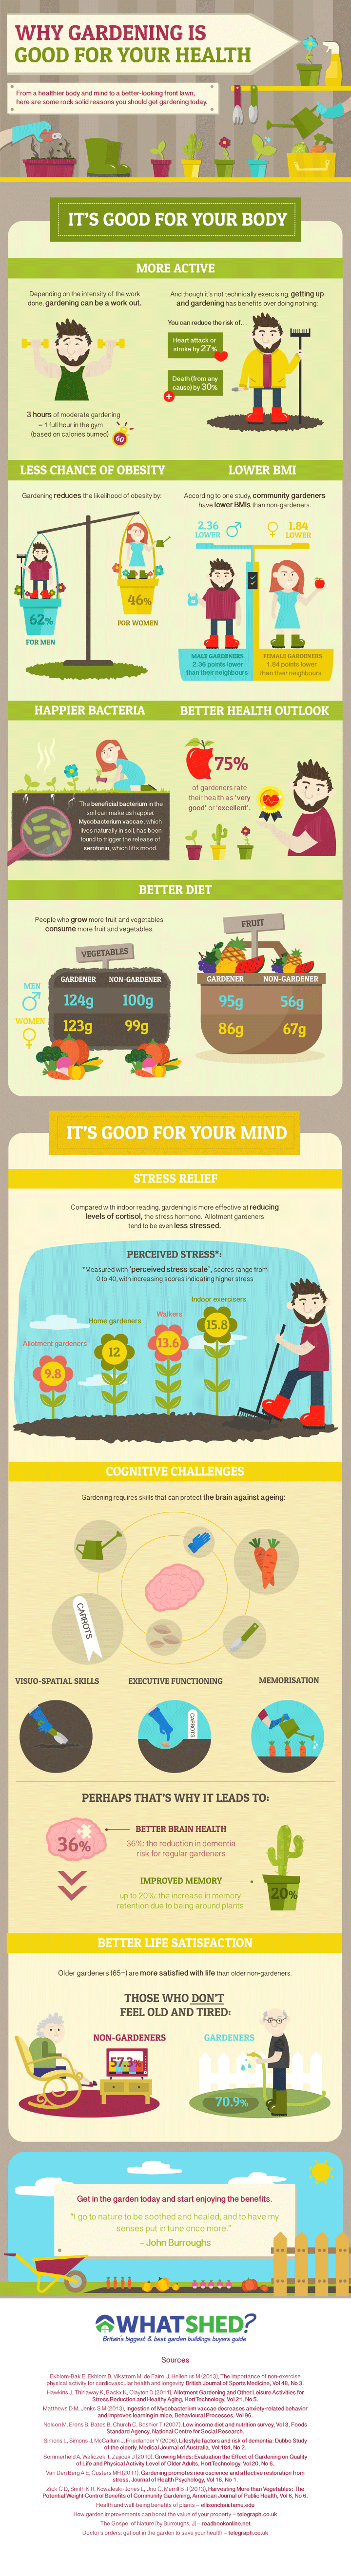 Why gardening is good for health